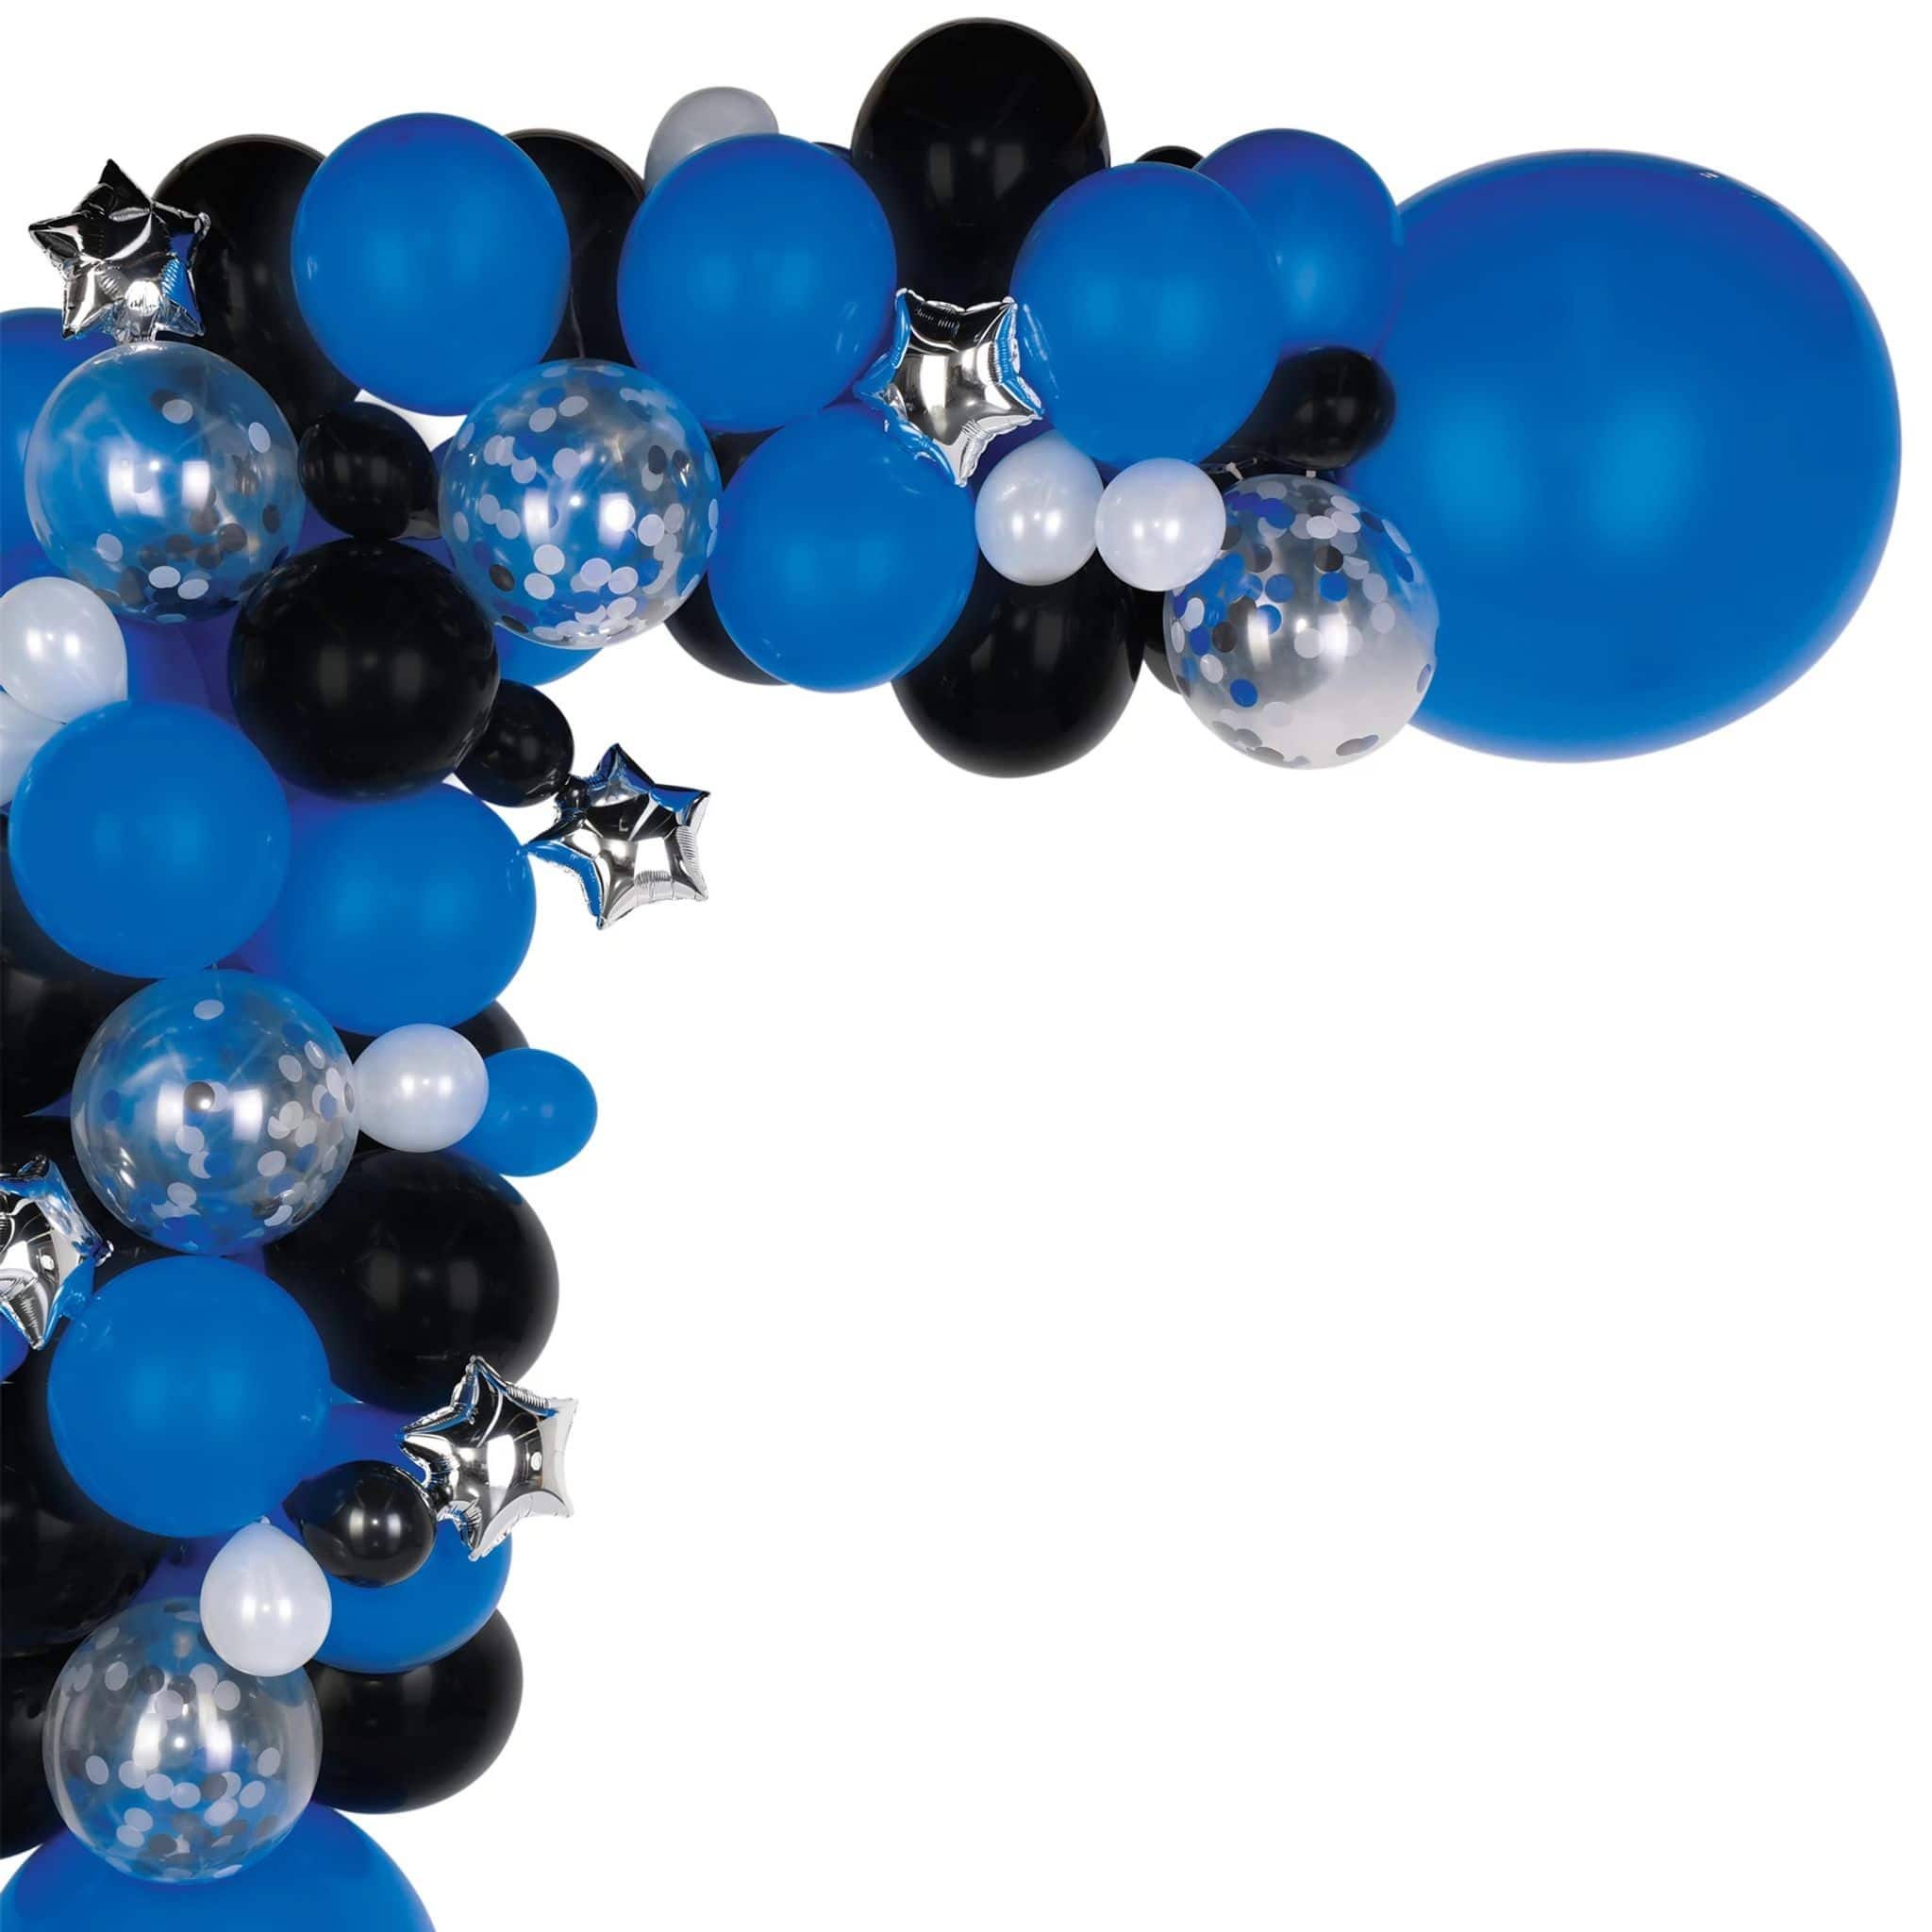 Graduation Balloon Garland Kit for a Festive Party | Image